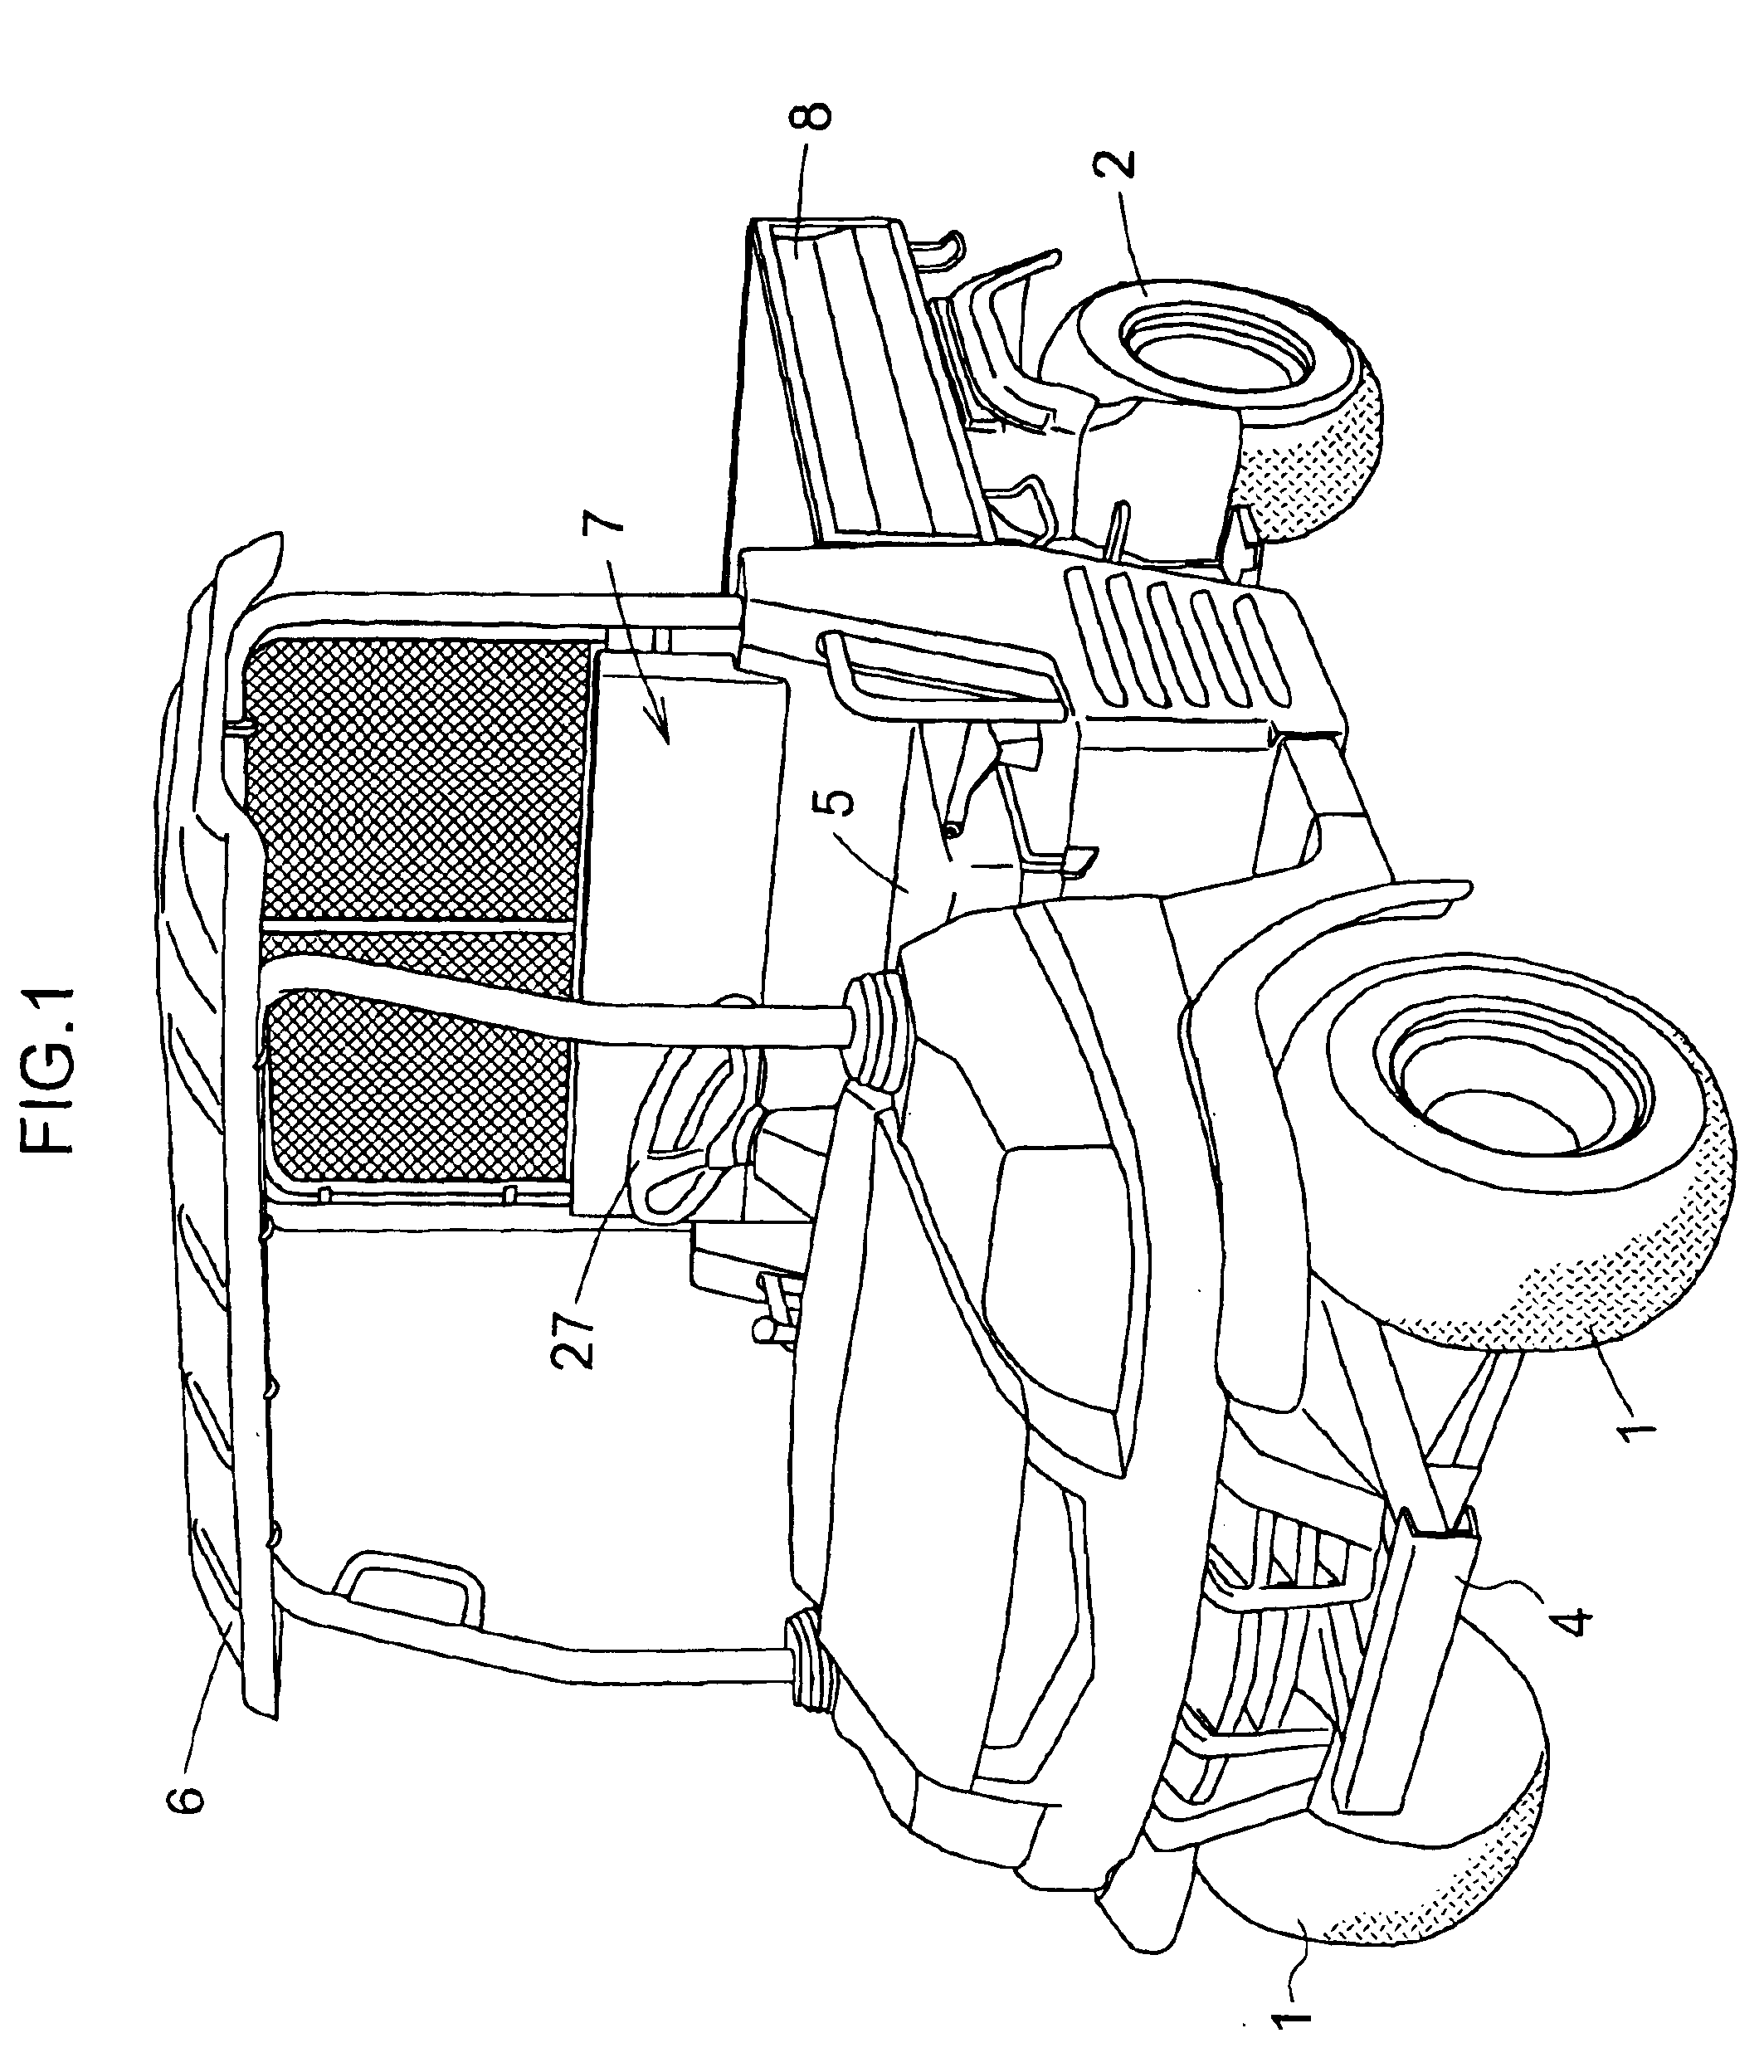 Propelling transmission control apparatus for a working vehicle having a hydrostatic stepless transmission